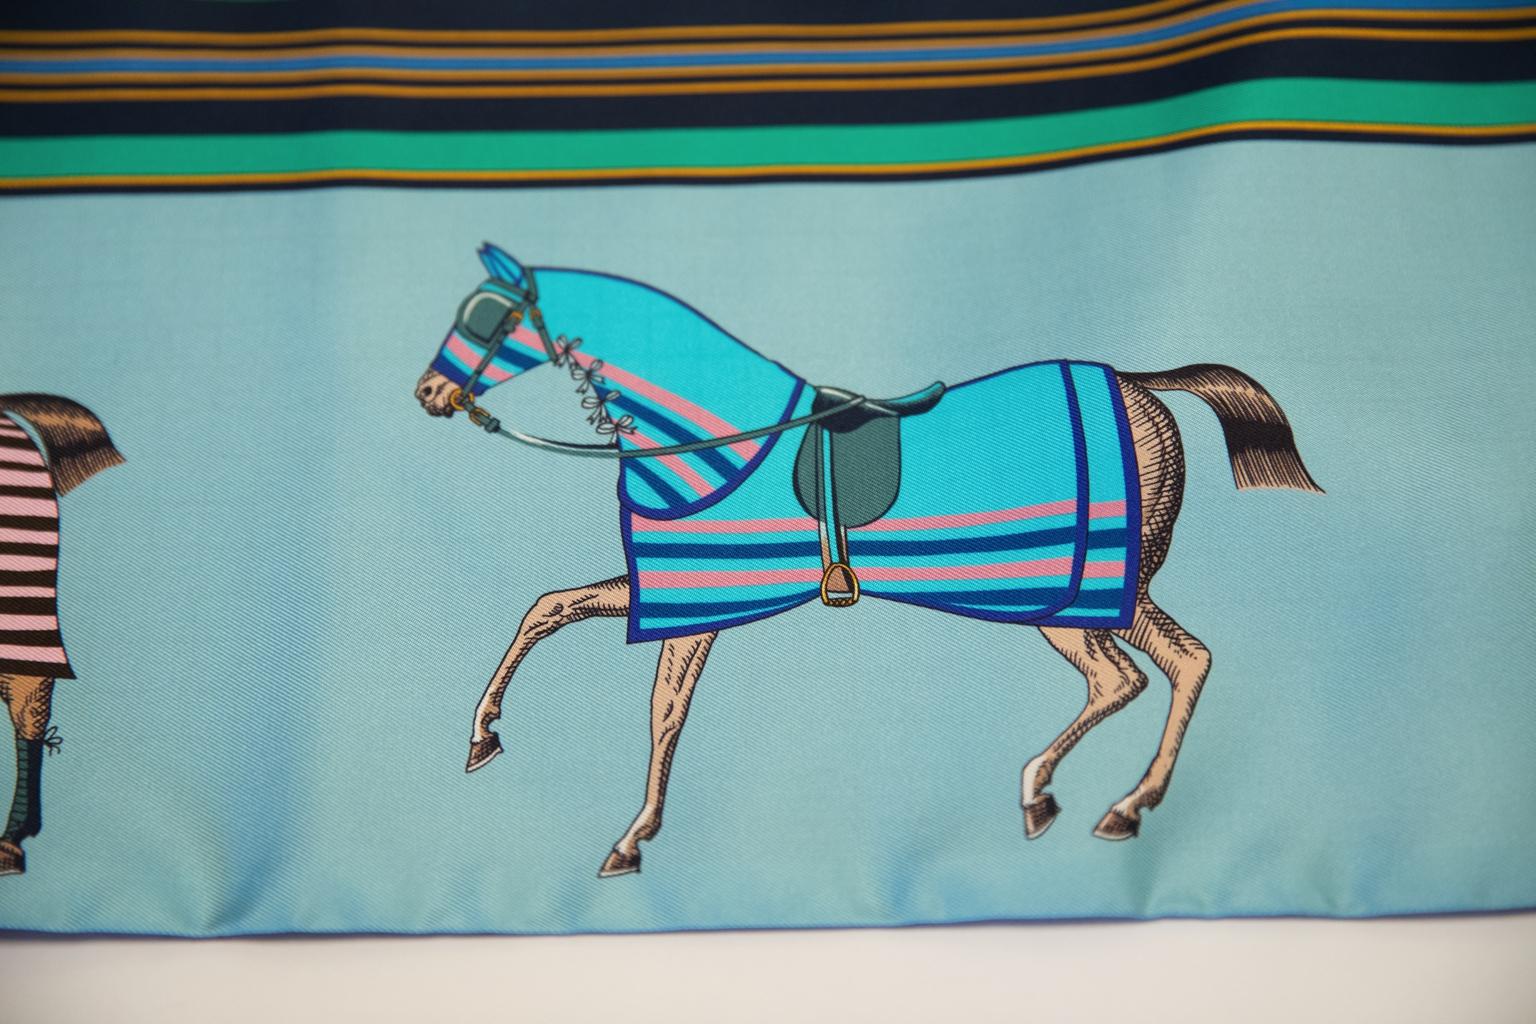 Hermès blue horse maxi twilly scarf. Double sided. Brand new in box with tag and ribbon.